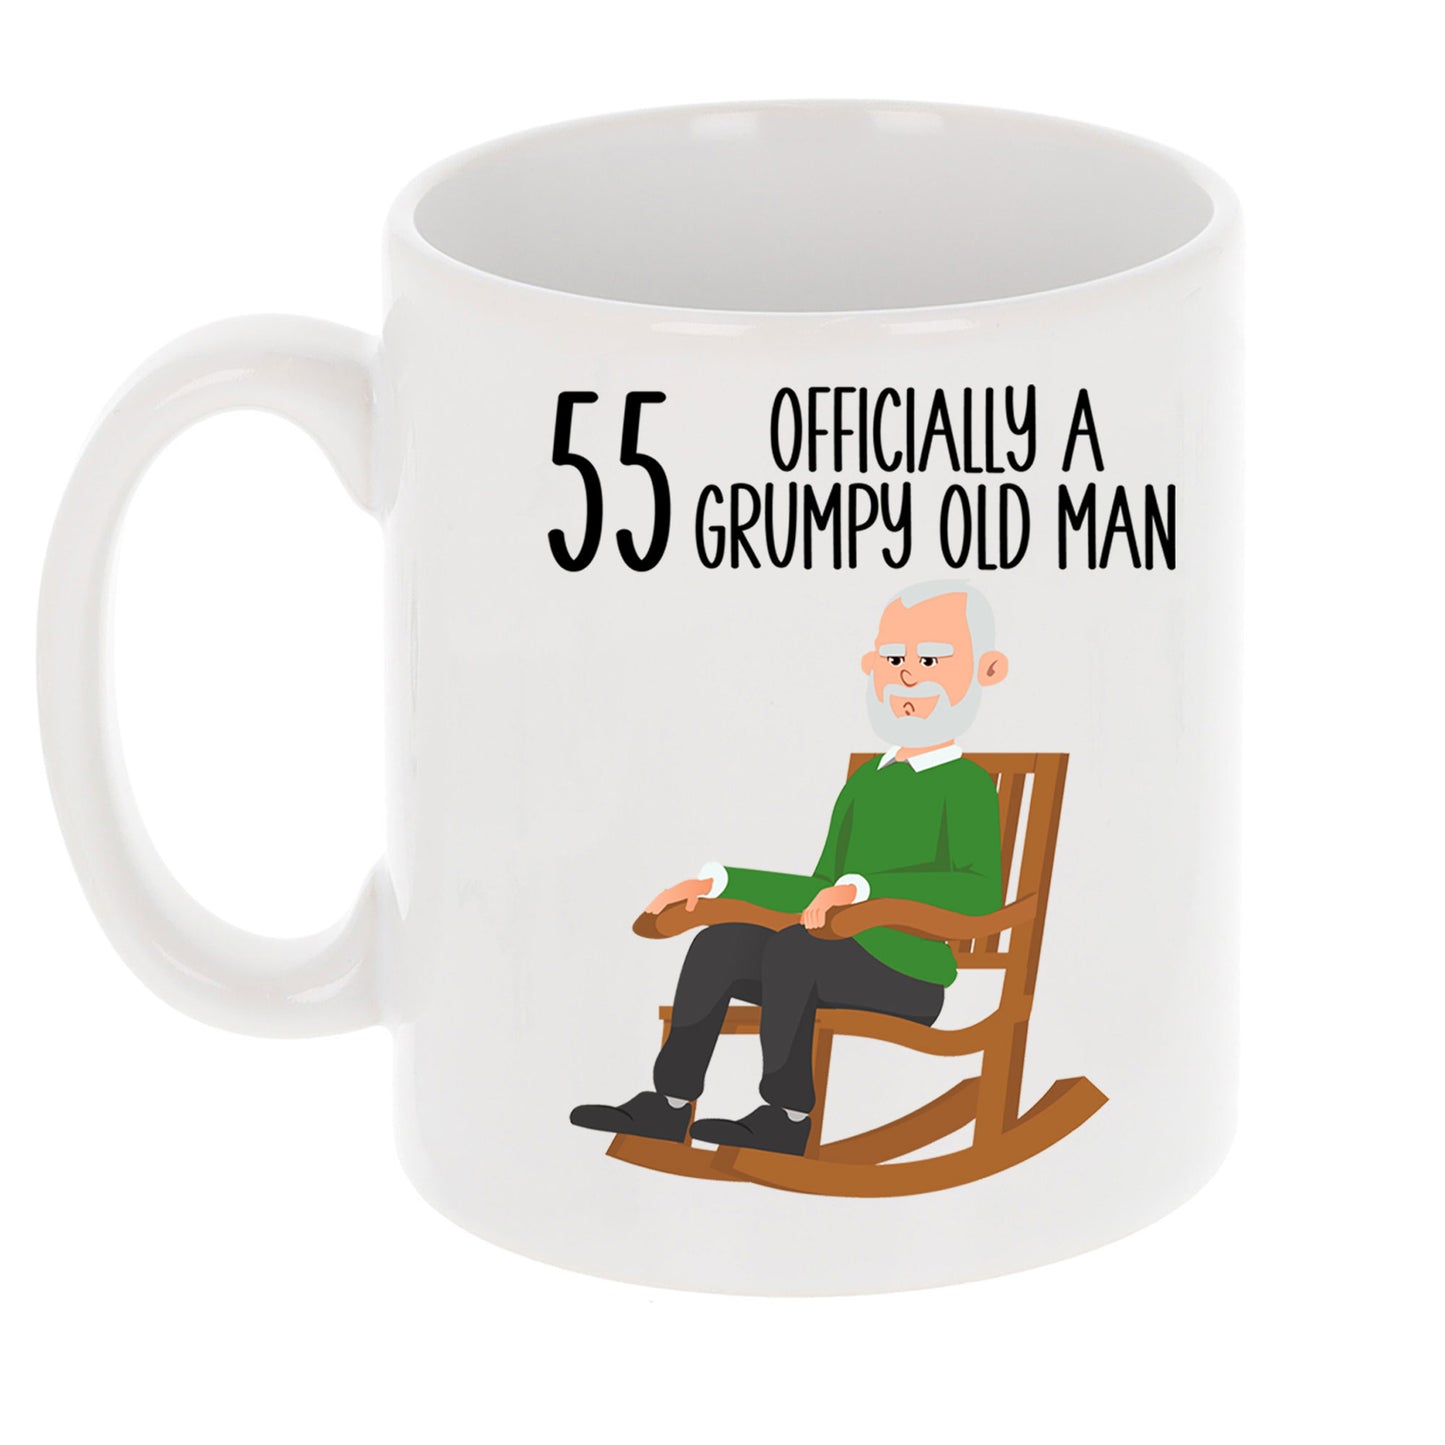 55 Officially A Grumpy Old Man Mug and/or Coaster Gift  - Always Looking Good - Mug On Its Own  